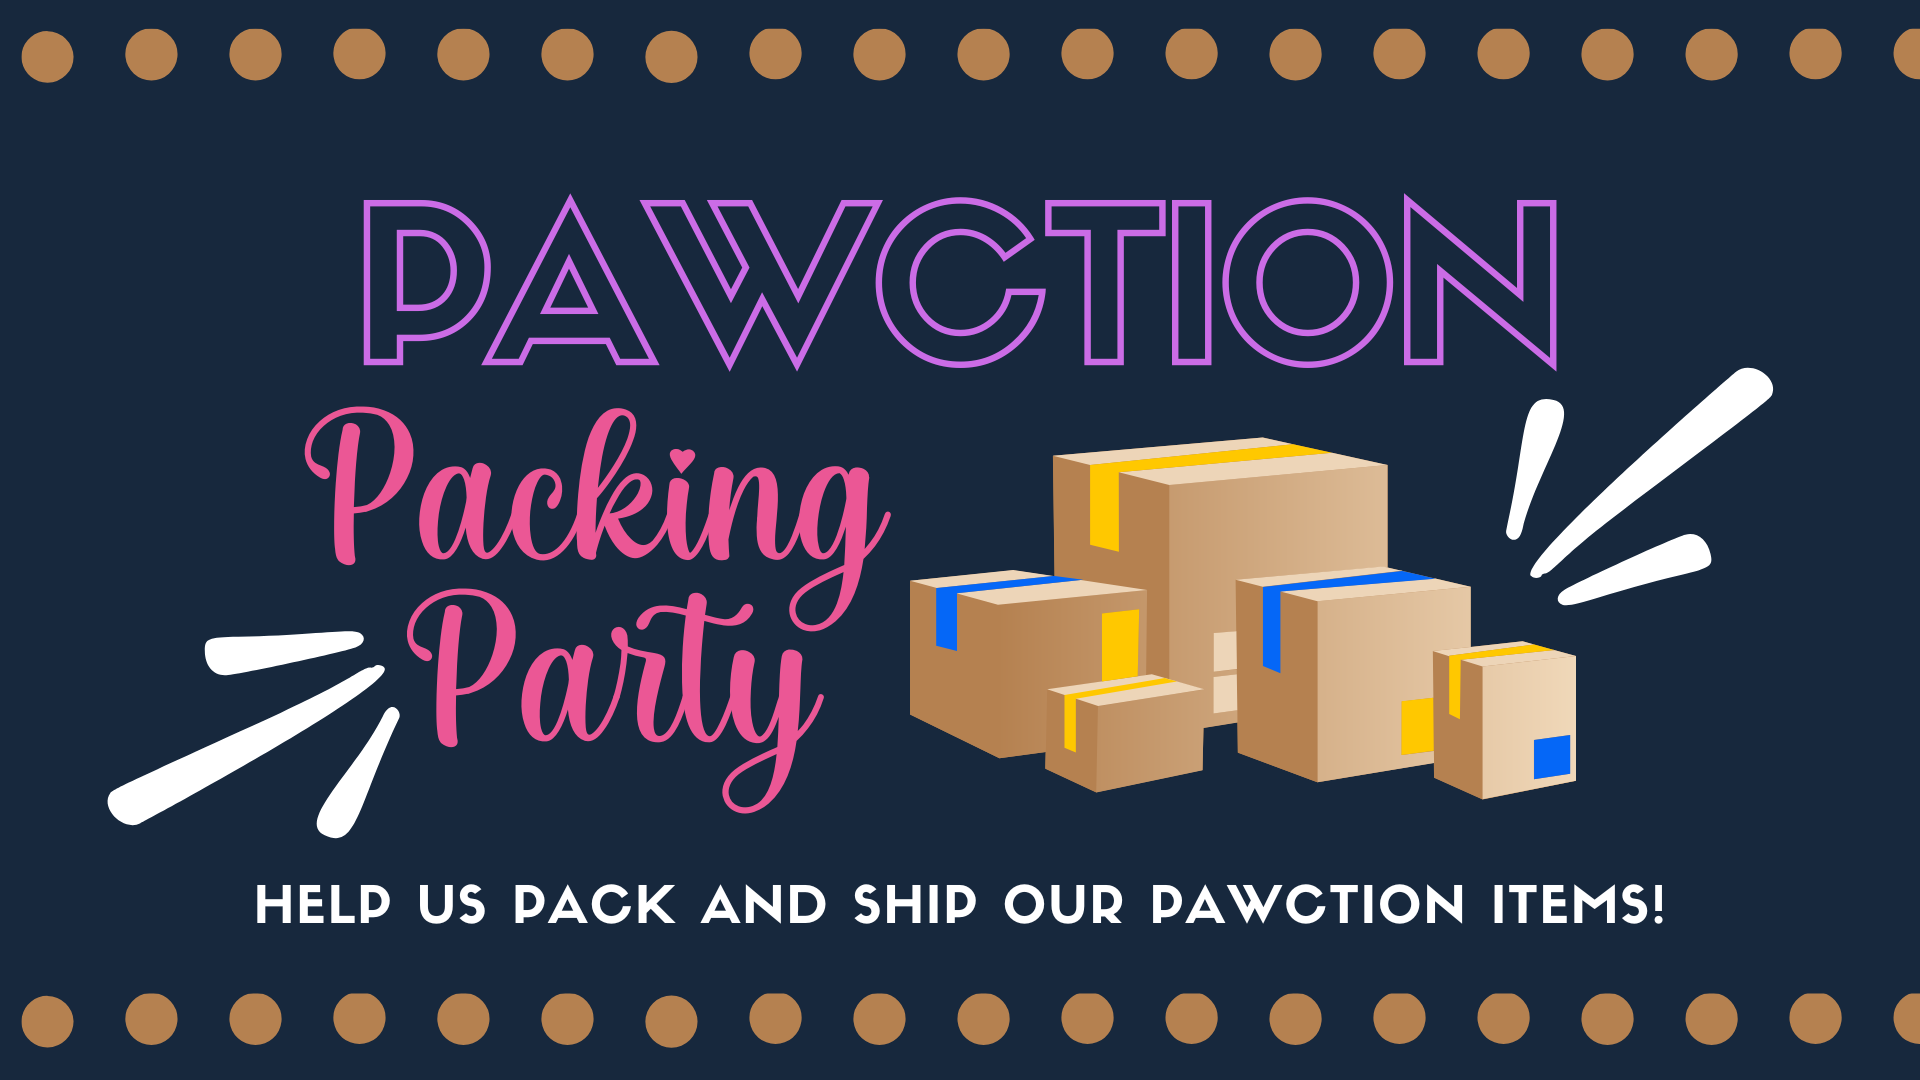 pawction Packing party